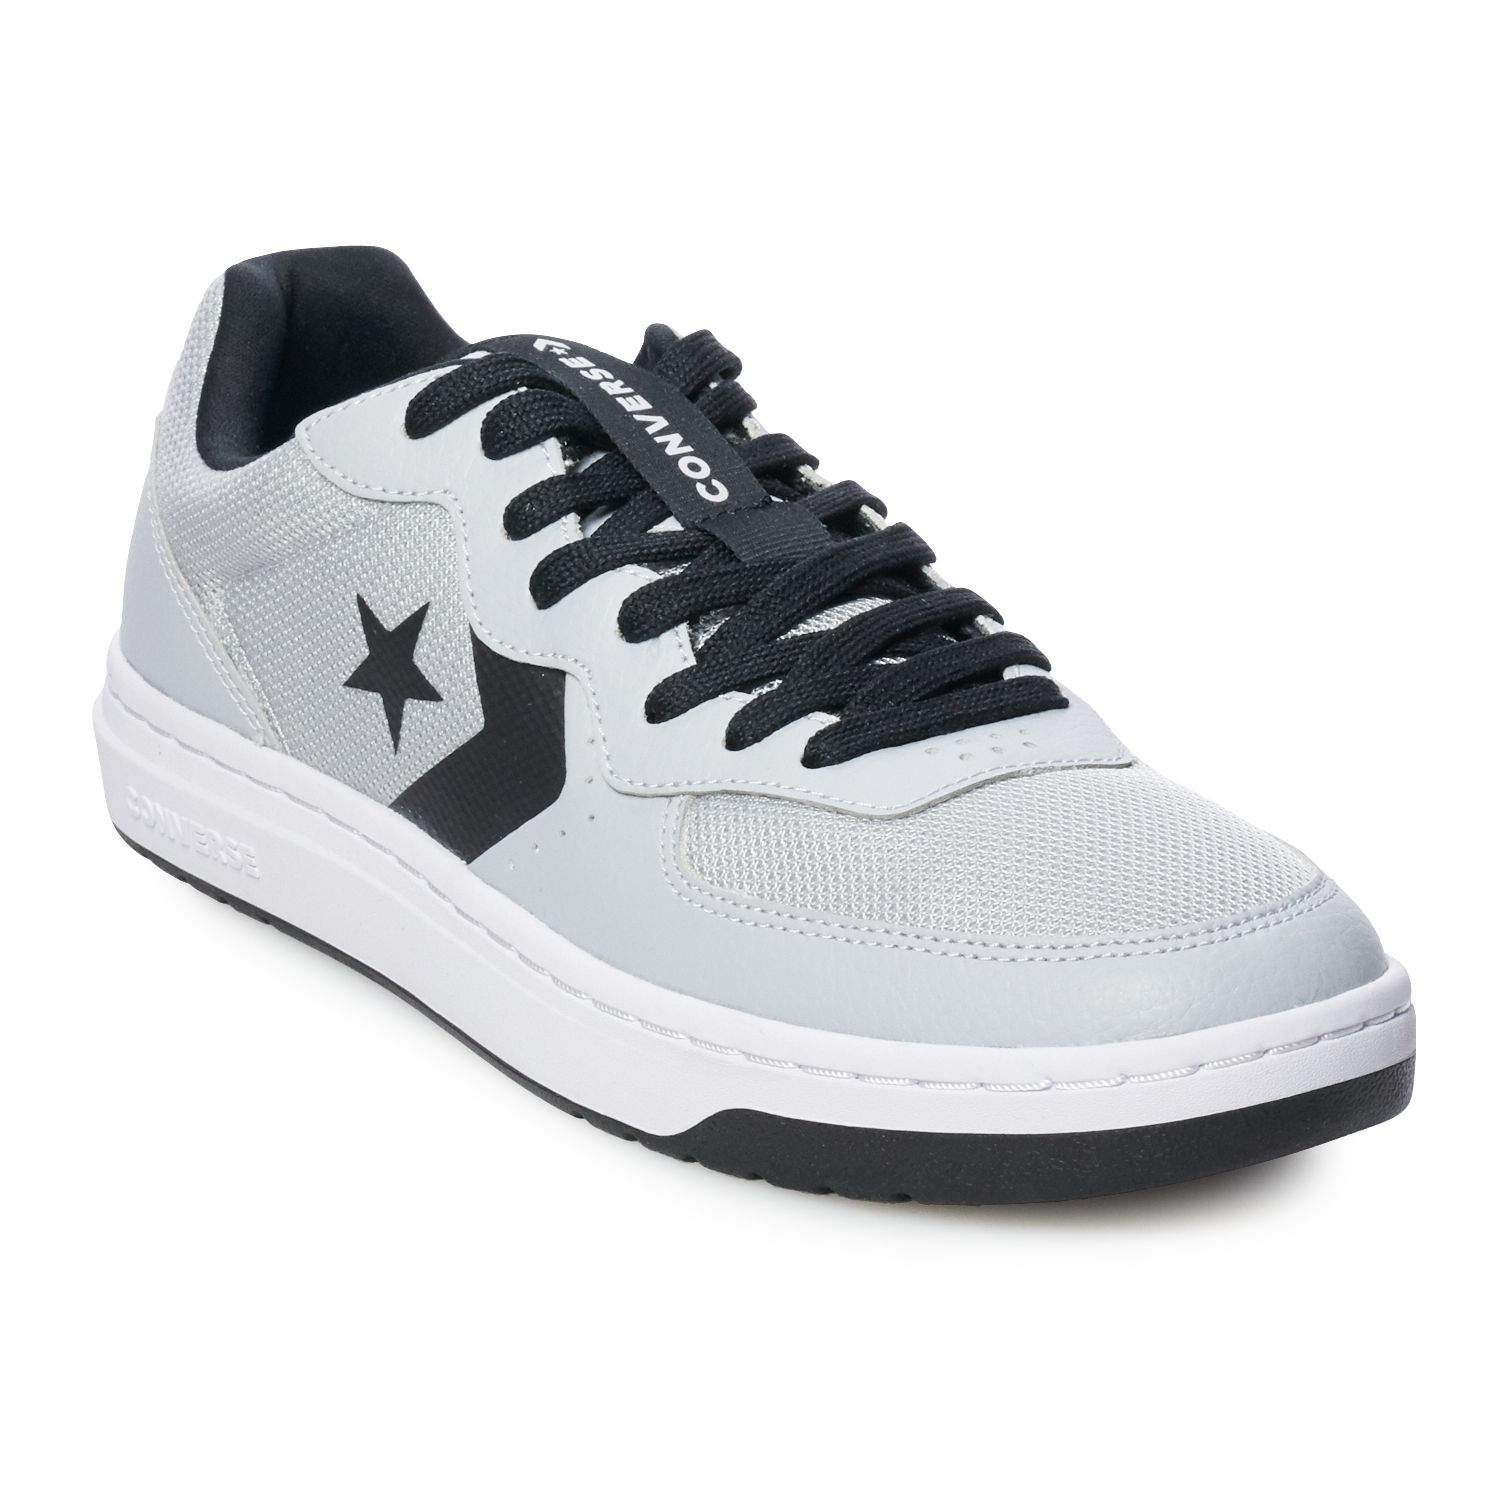 converse rival leather sneakers